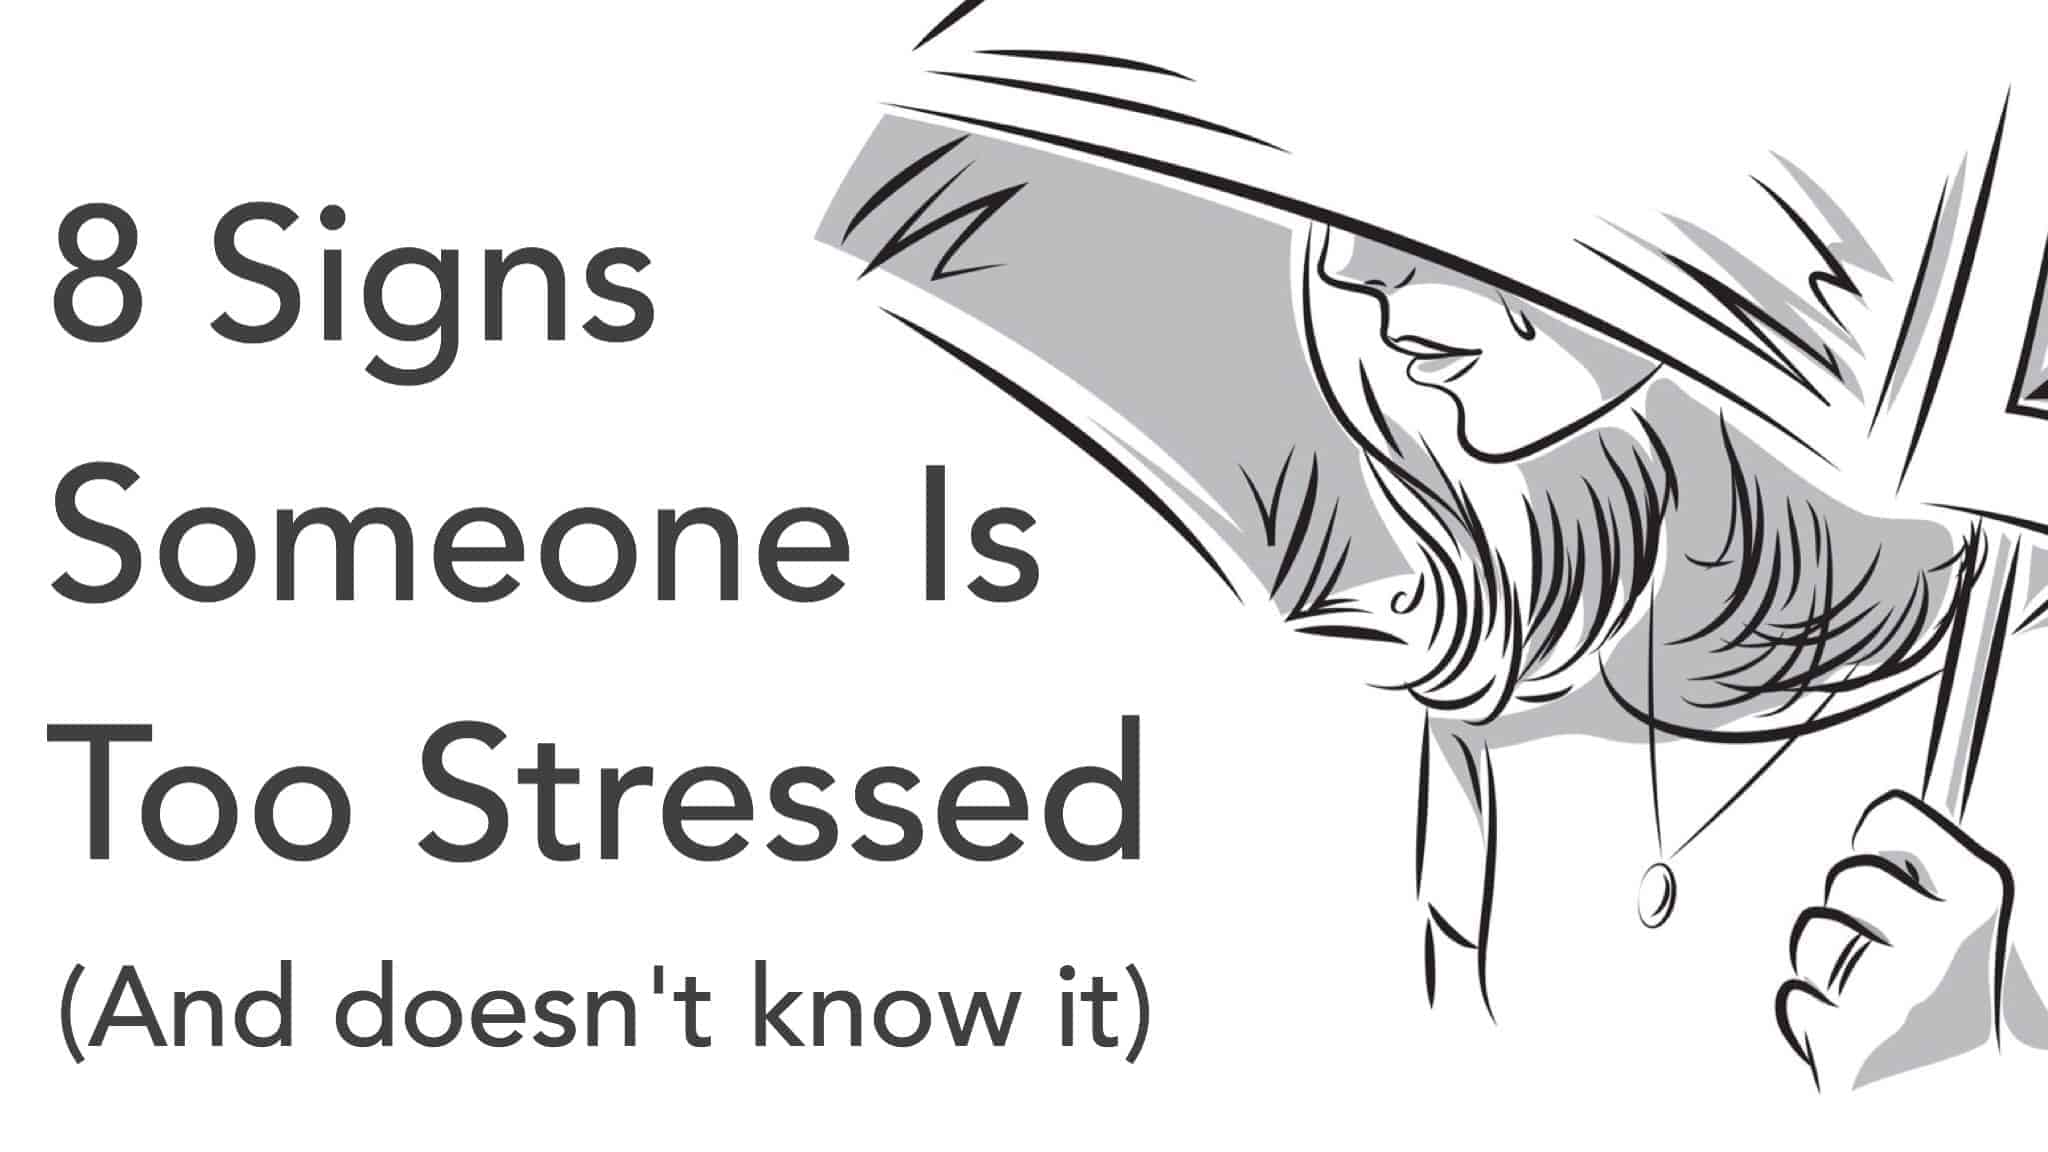 signs-someone-is-too-stressed.jpg